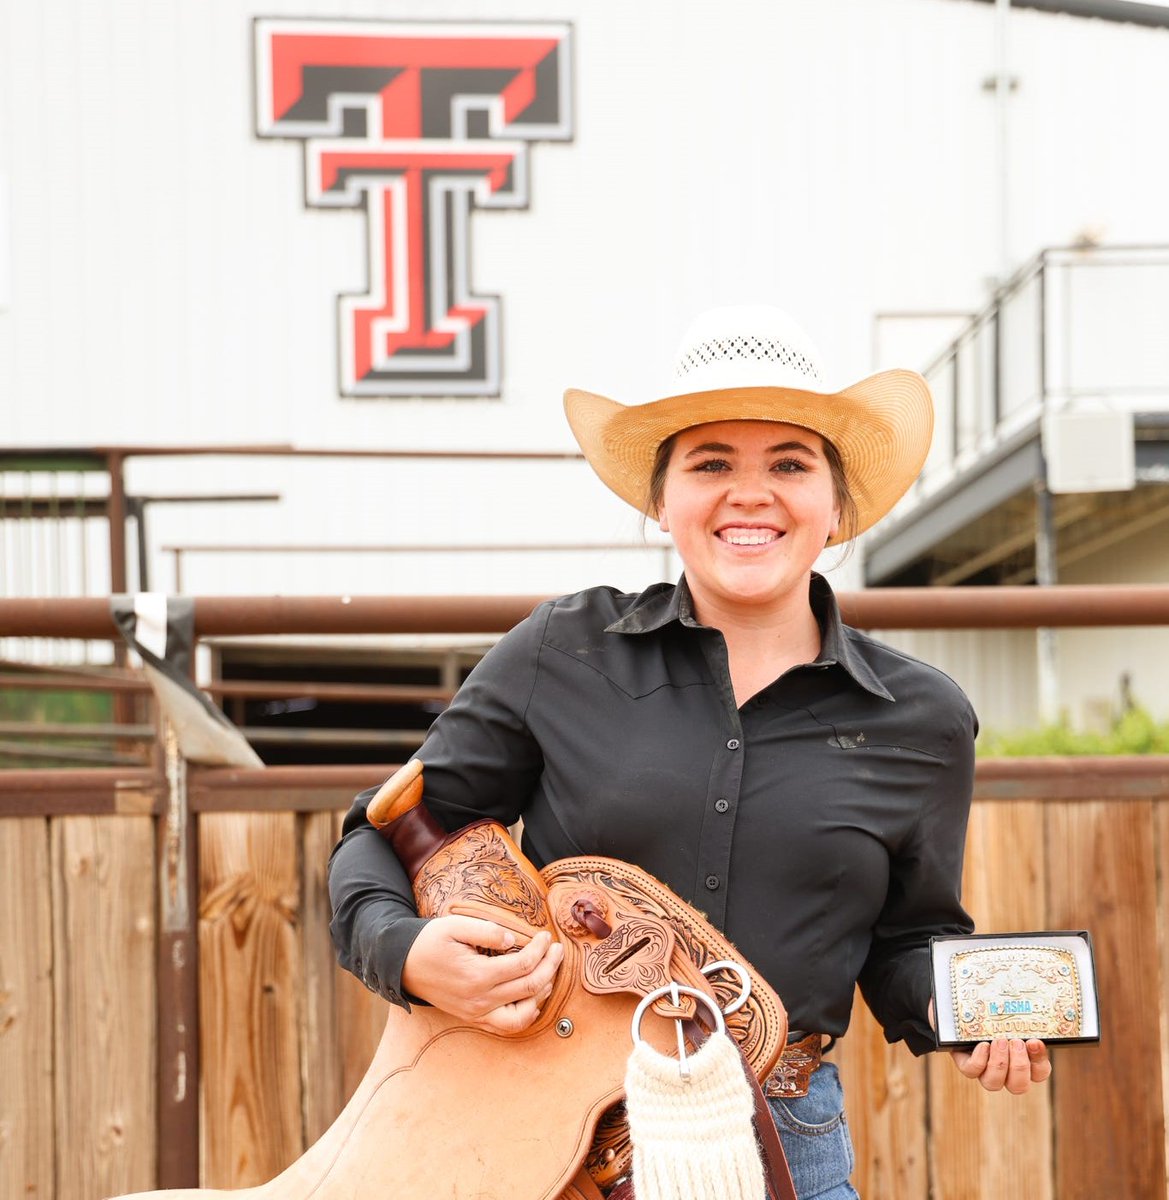 Congrats to #RawlsCollege student Kenedie Southard for being named the 2024 NIRSHA Novice Champion and earning the Kris Wilson Top Hand Award at the National Intercollegiate Ranch and Stock Horse Association national championships earlier this month!